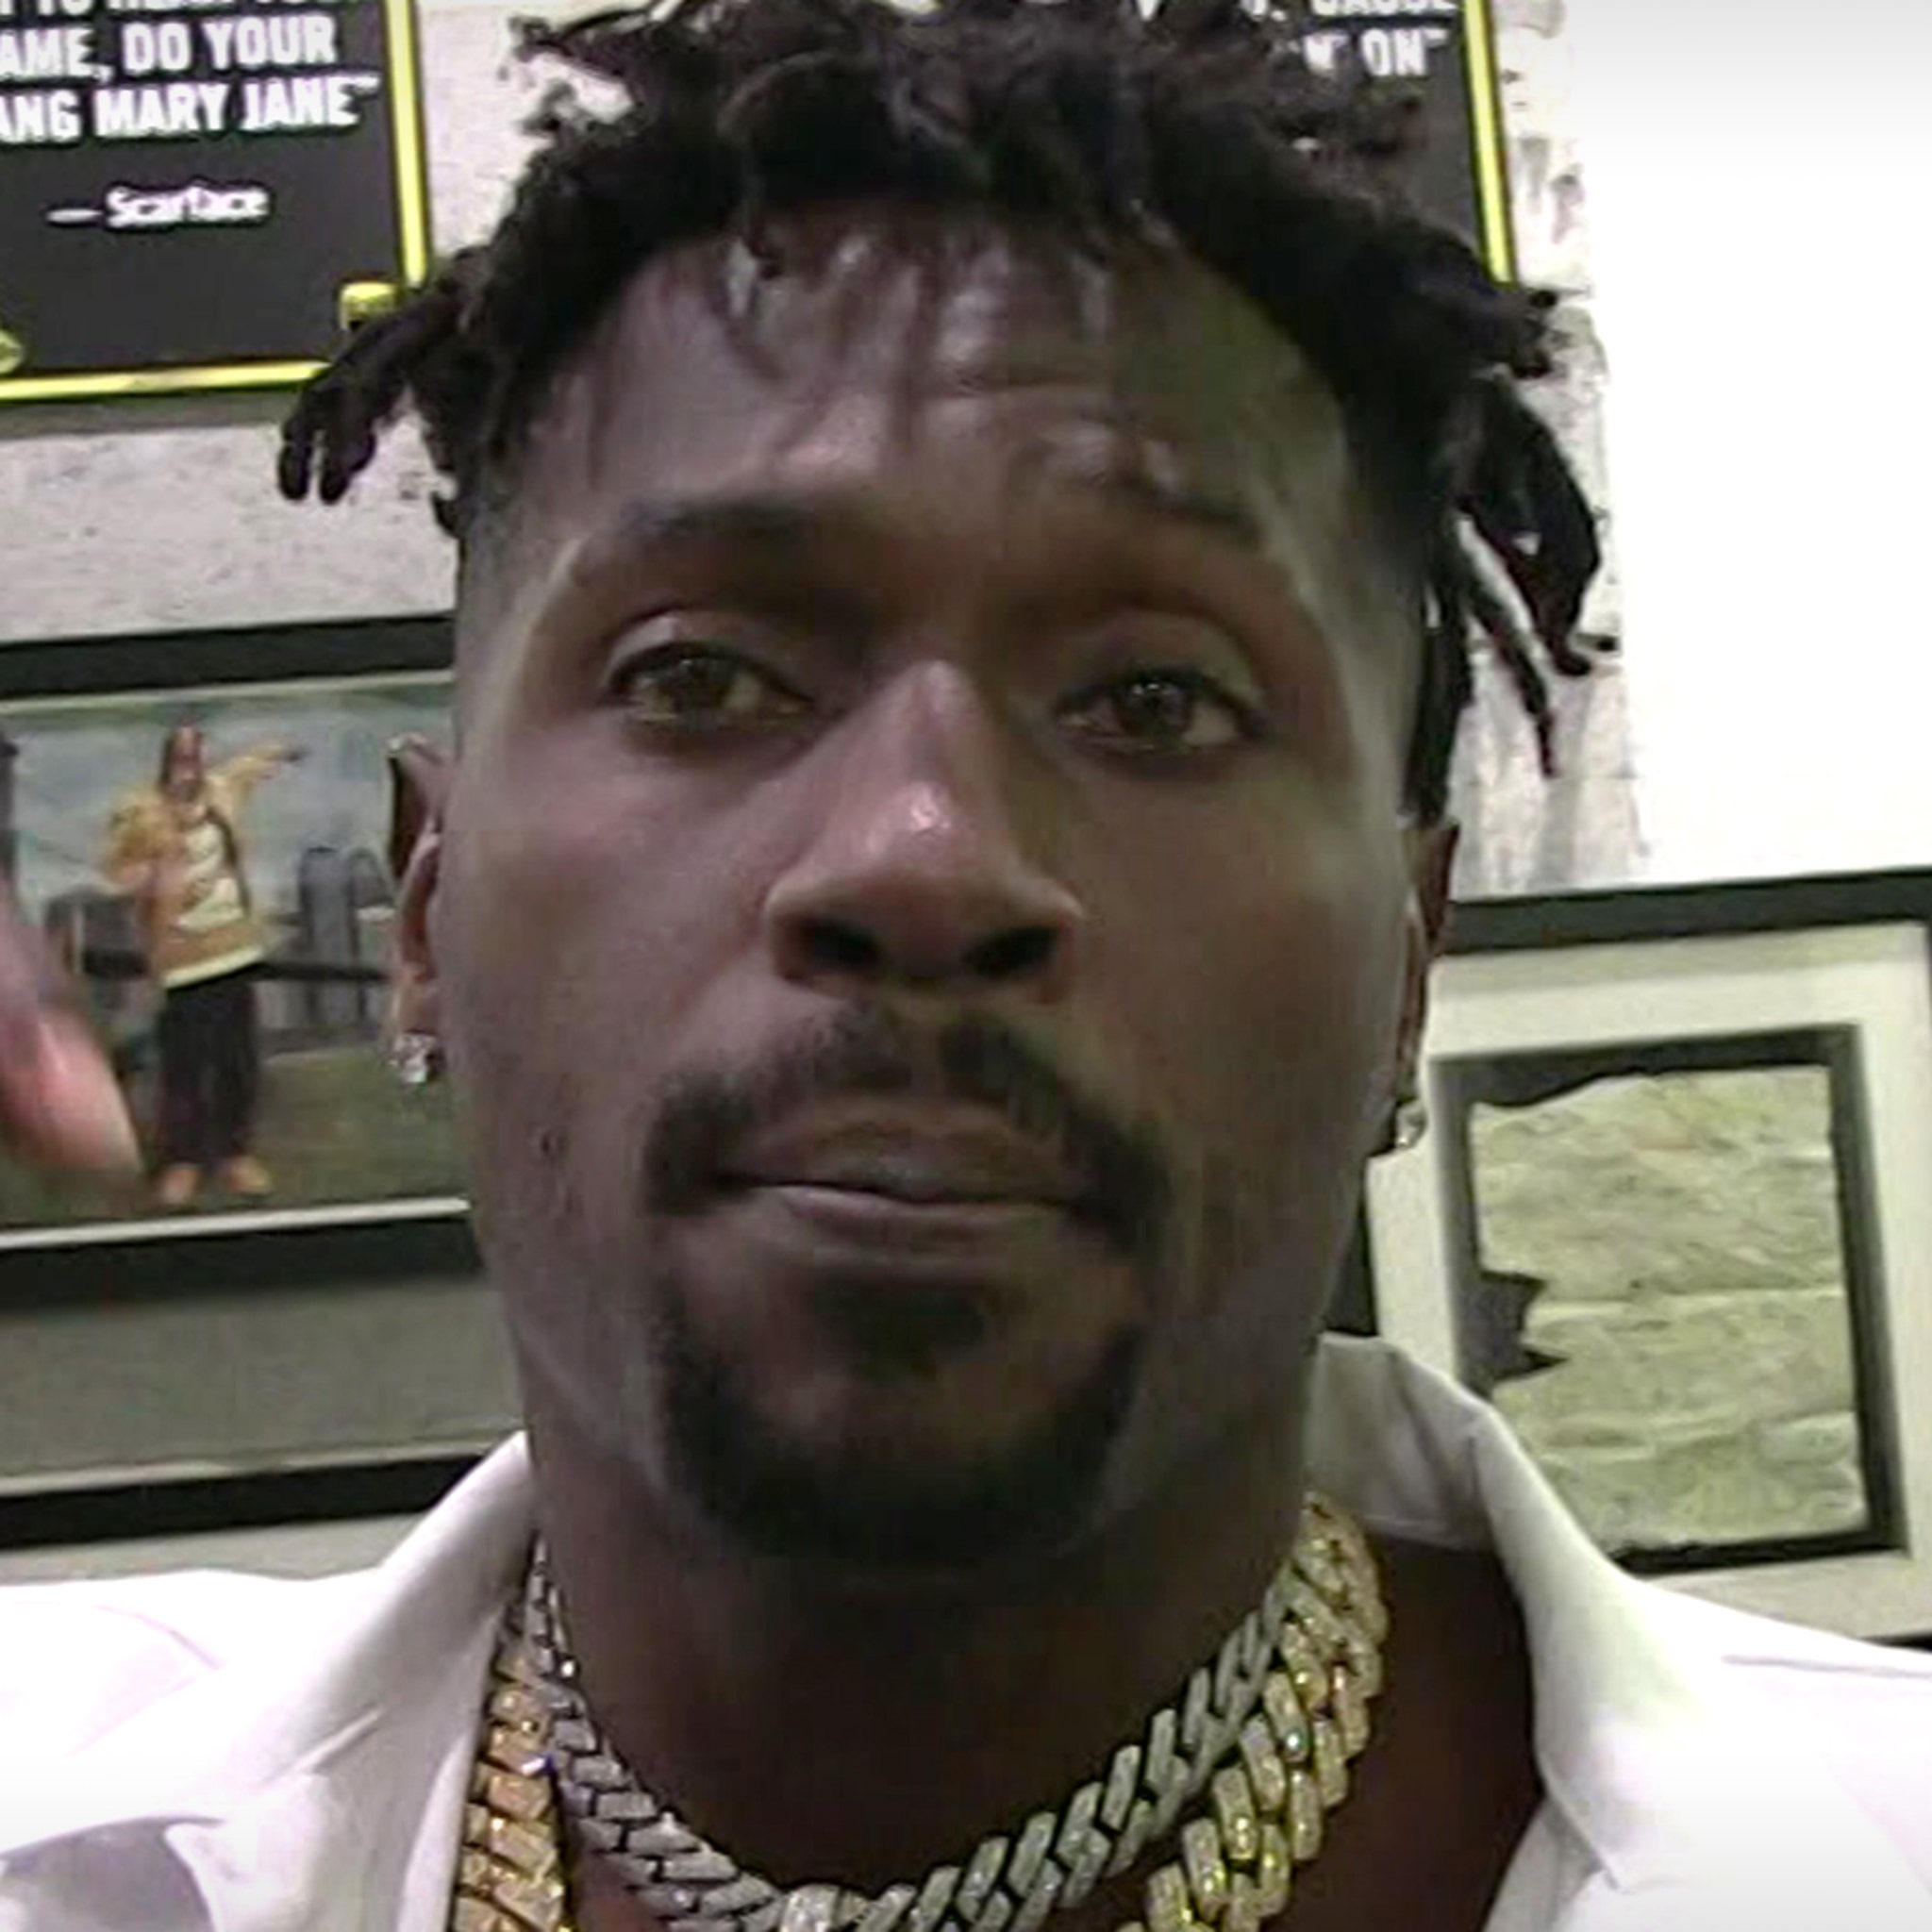 NFL Star Antonio Brown Kicked Off Snapchat After Posting Sexually